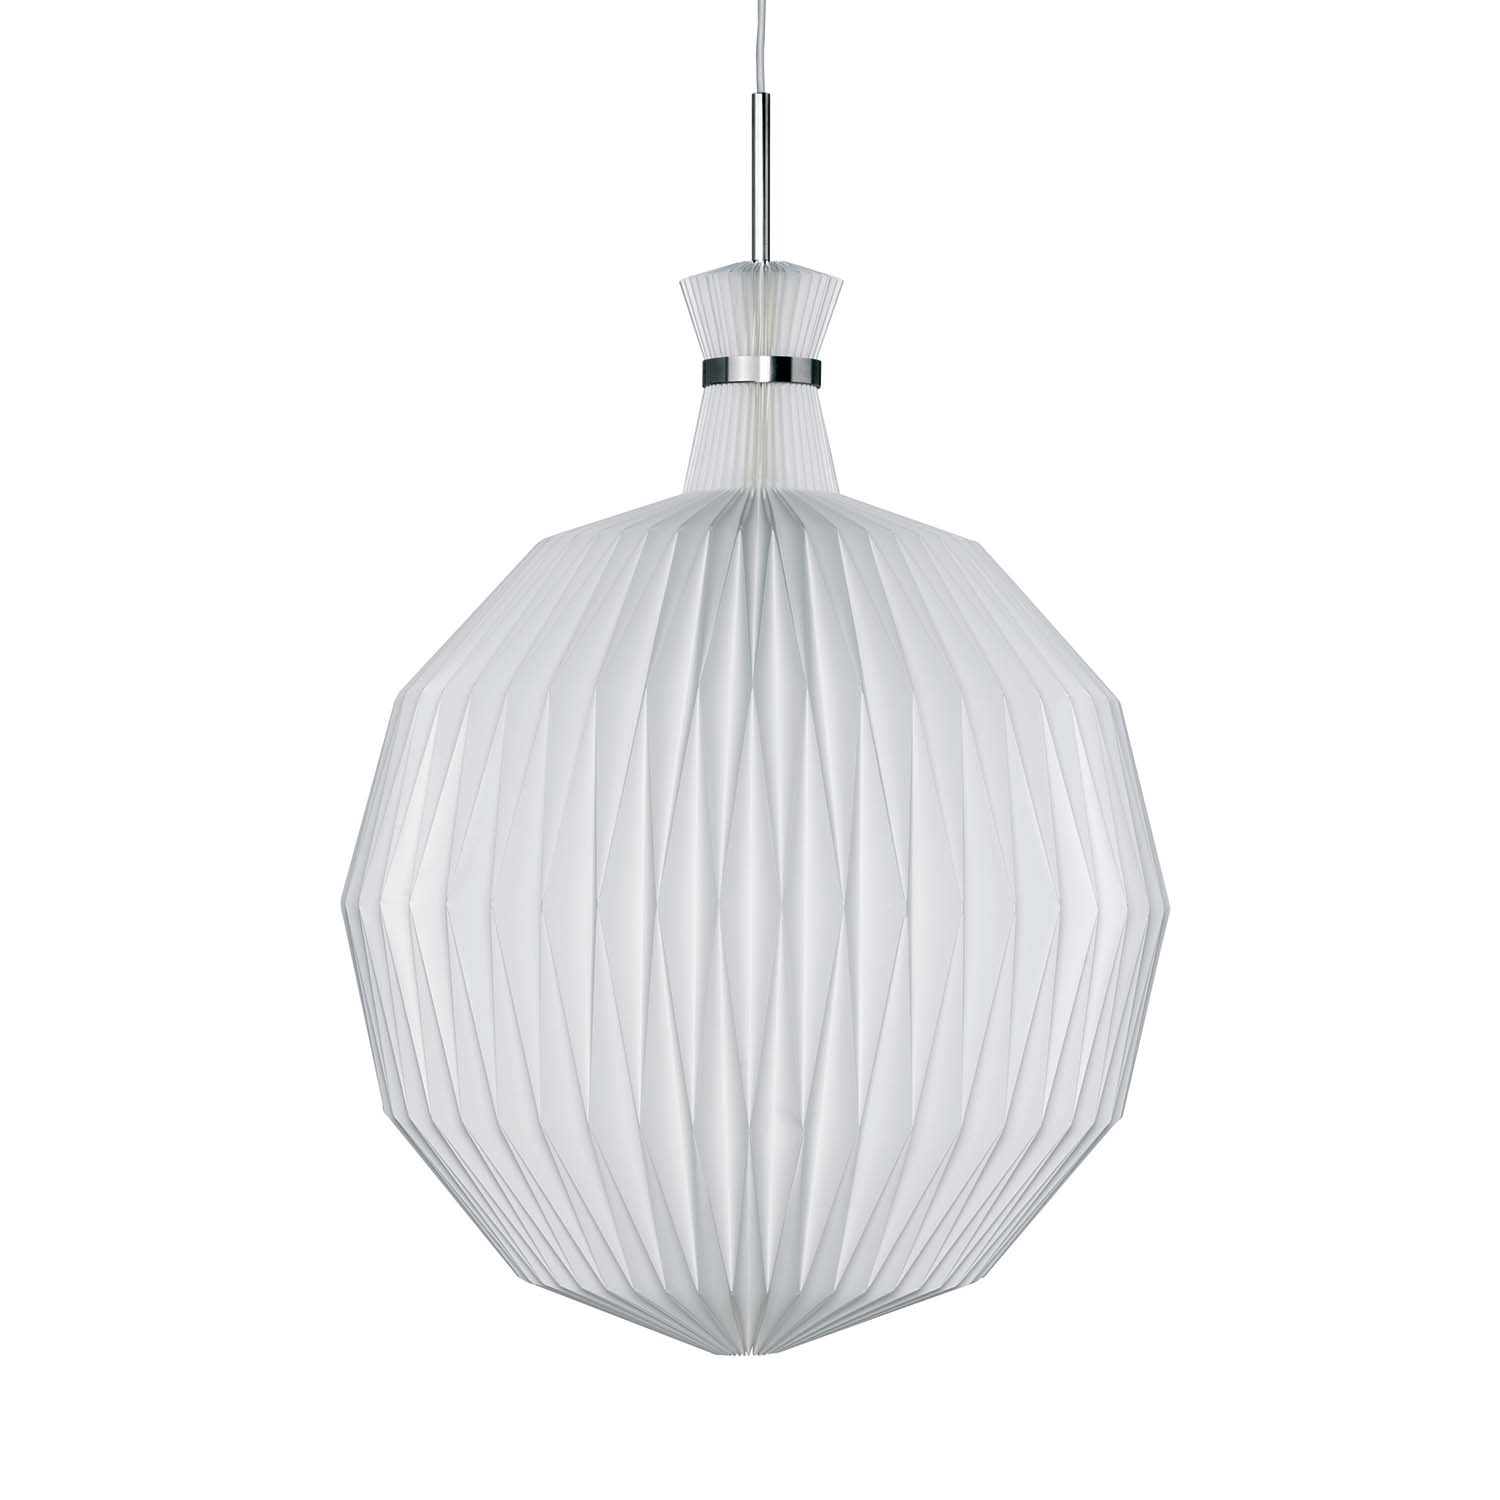 CLASSIC 101 - Handcrafted white pleated design ball pendant light